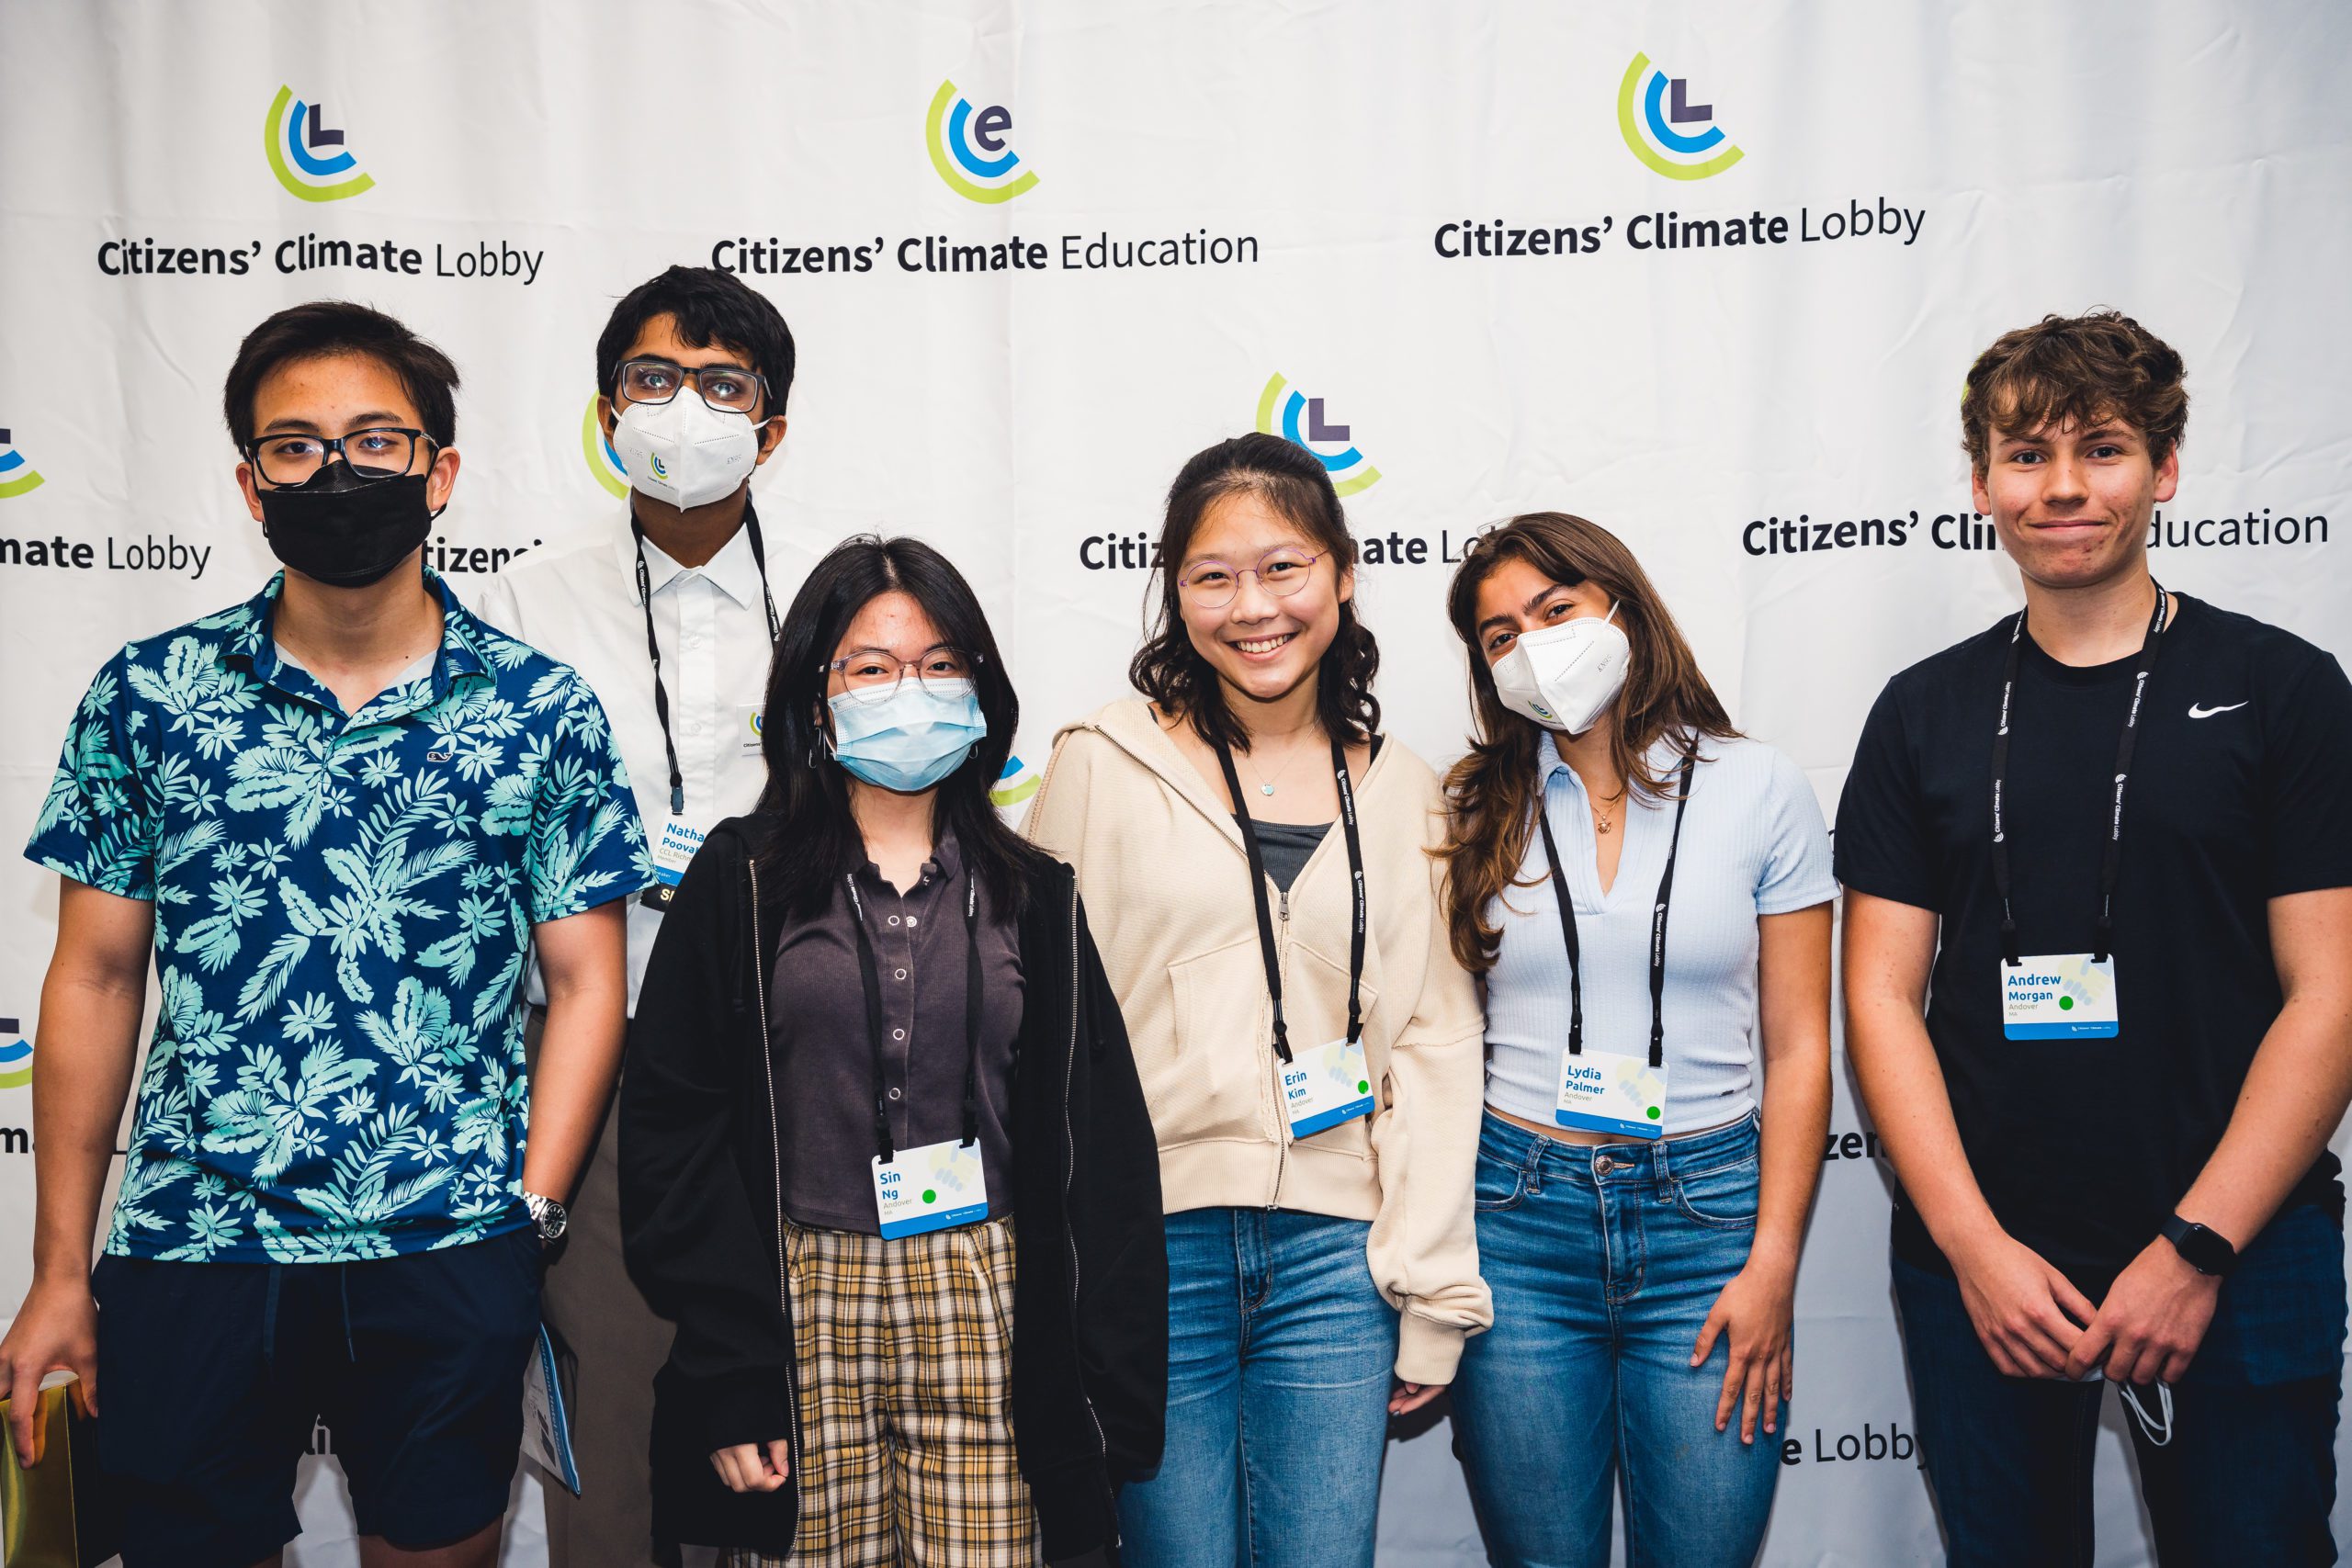 A group of youth standing in front of a Citizens' Climate Education and Citizens' Climate Lobby Backdrop